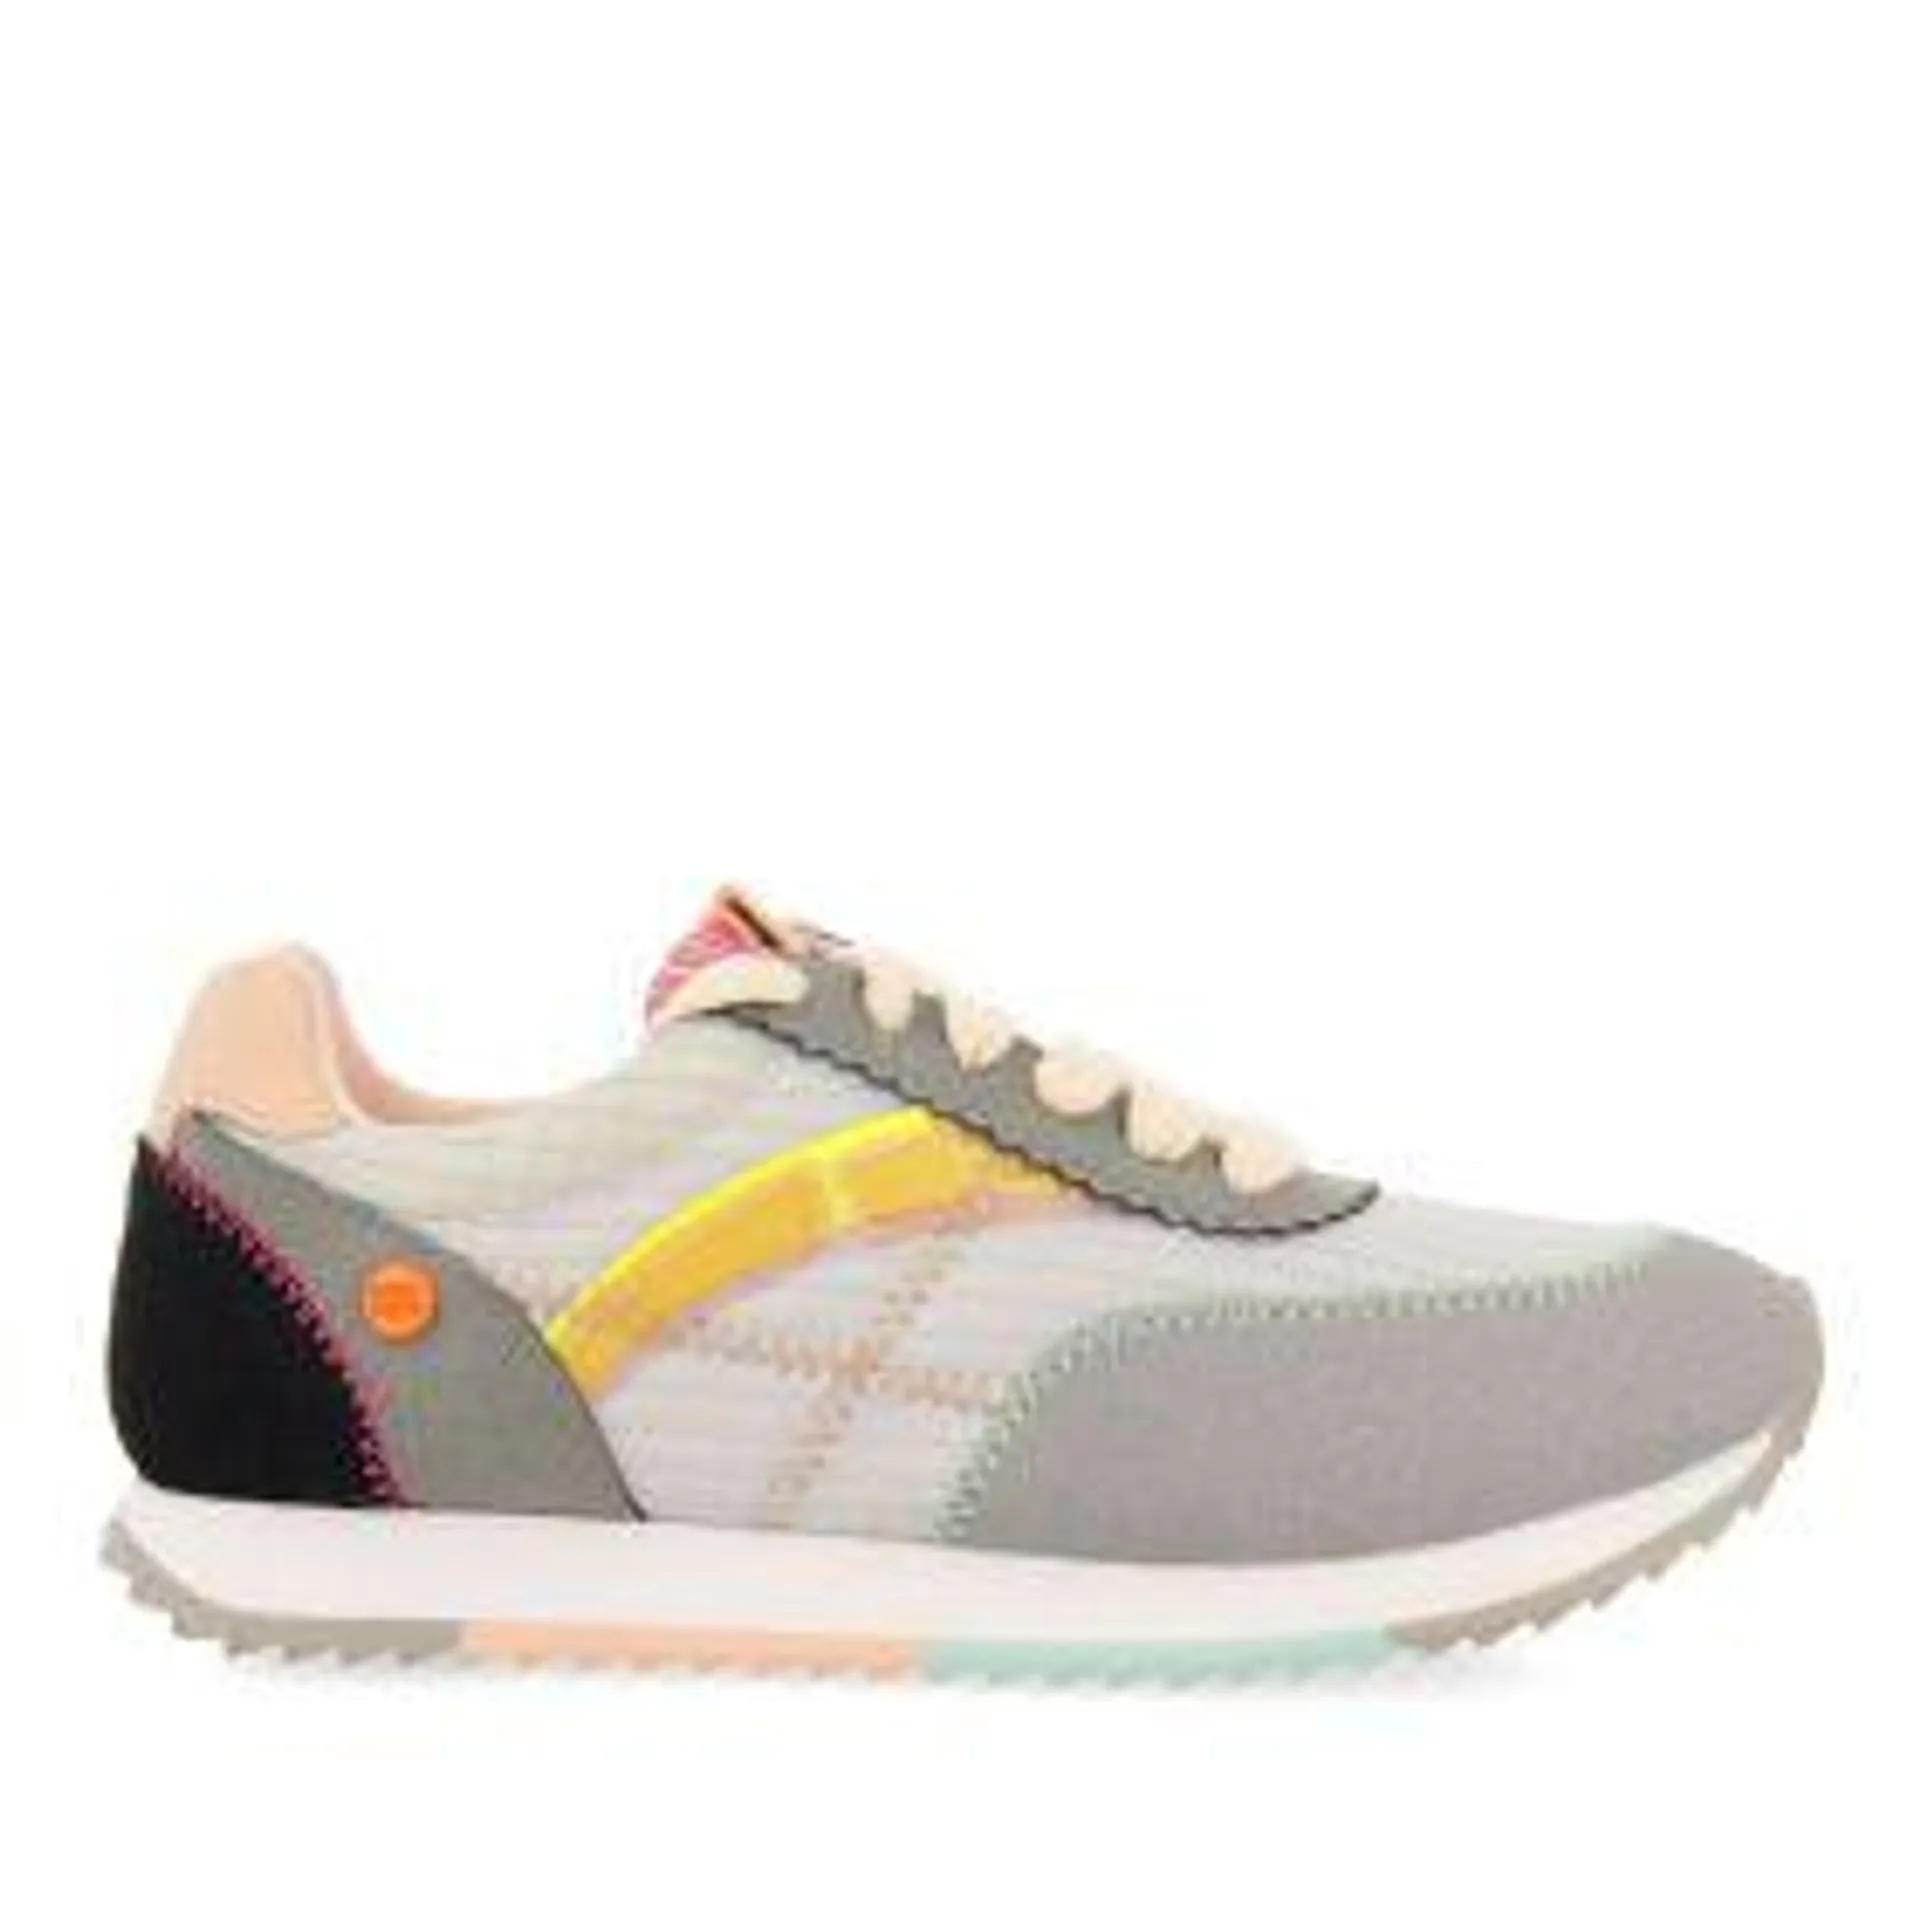 Madirac girls grey sneakers with colourful topstitching